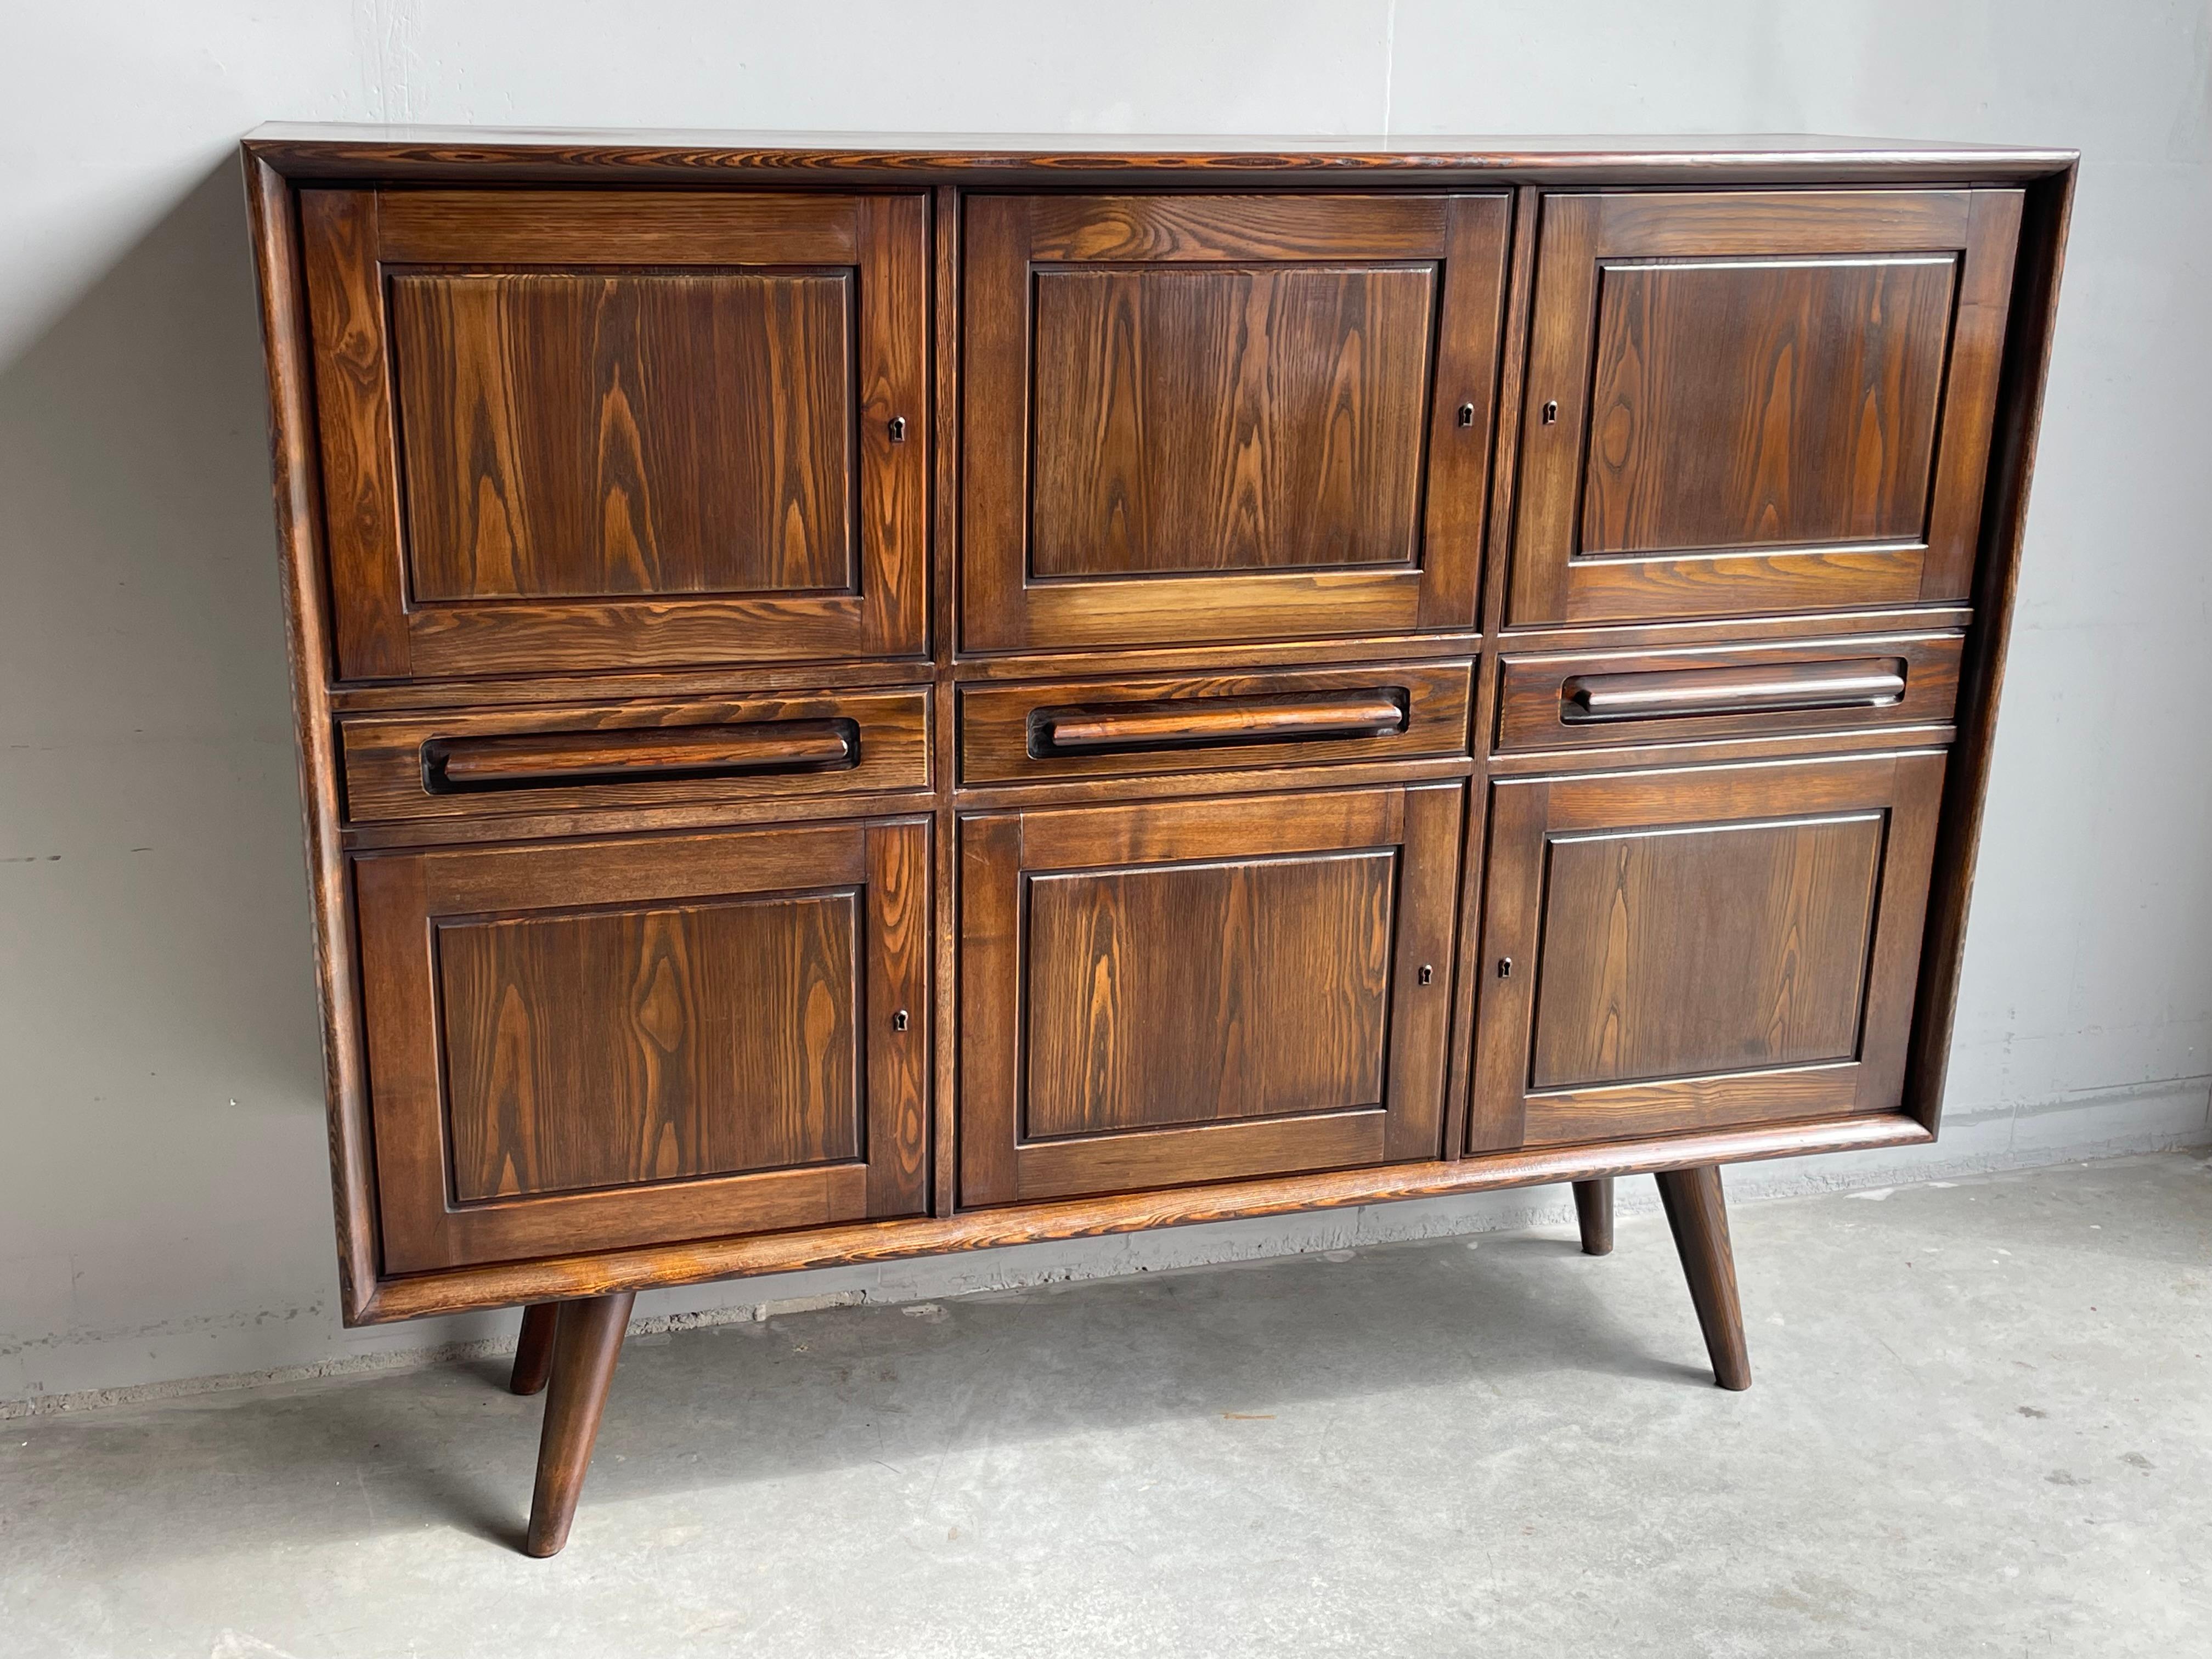 Very Rare Mid-Century Modern Sideboard / Credenza by 't Woonhuys of Amsterdam In Good Condition For Sale In Lisse, NL